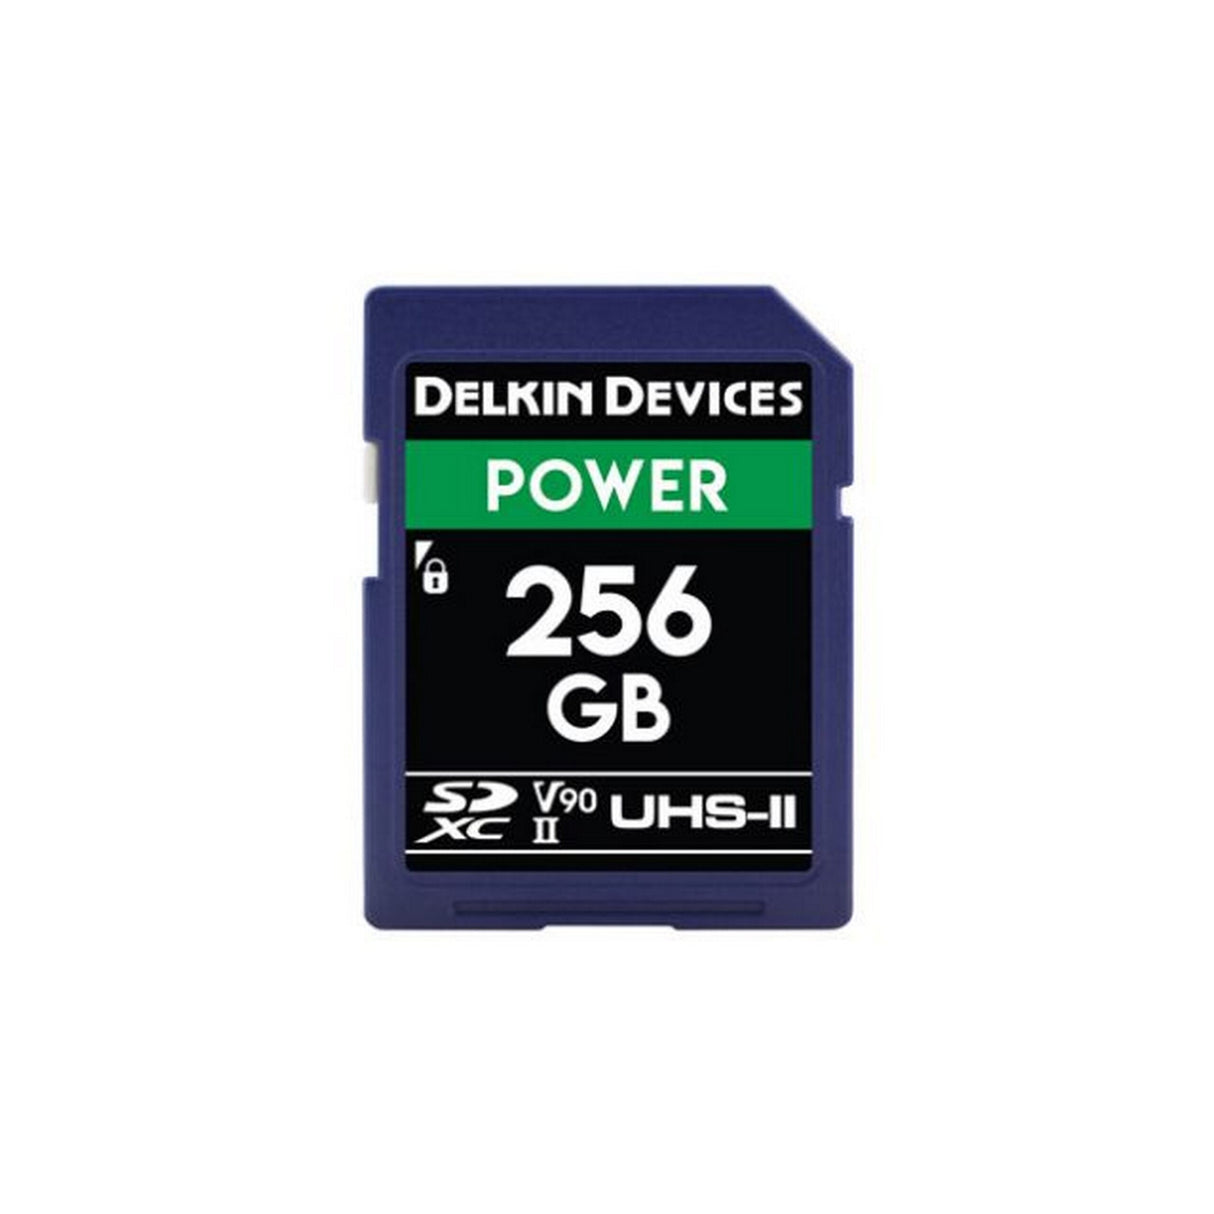 Delkin Devices Power UHS-II U3/V90 SD Memory Card, 256GB